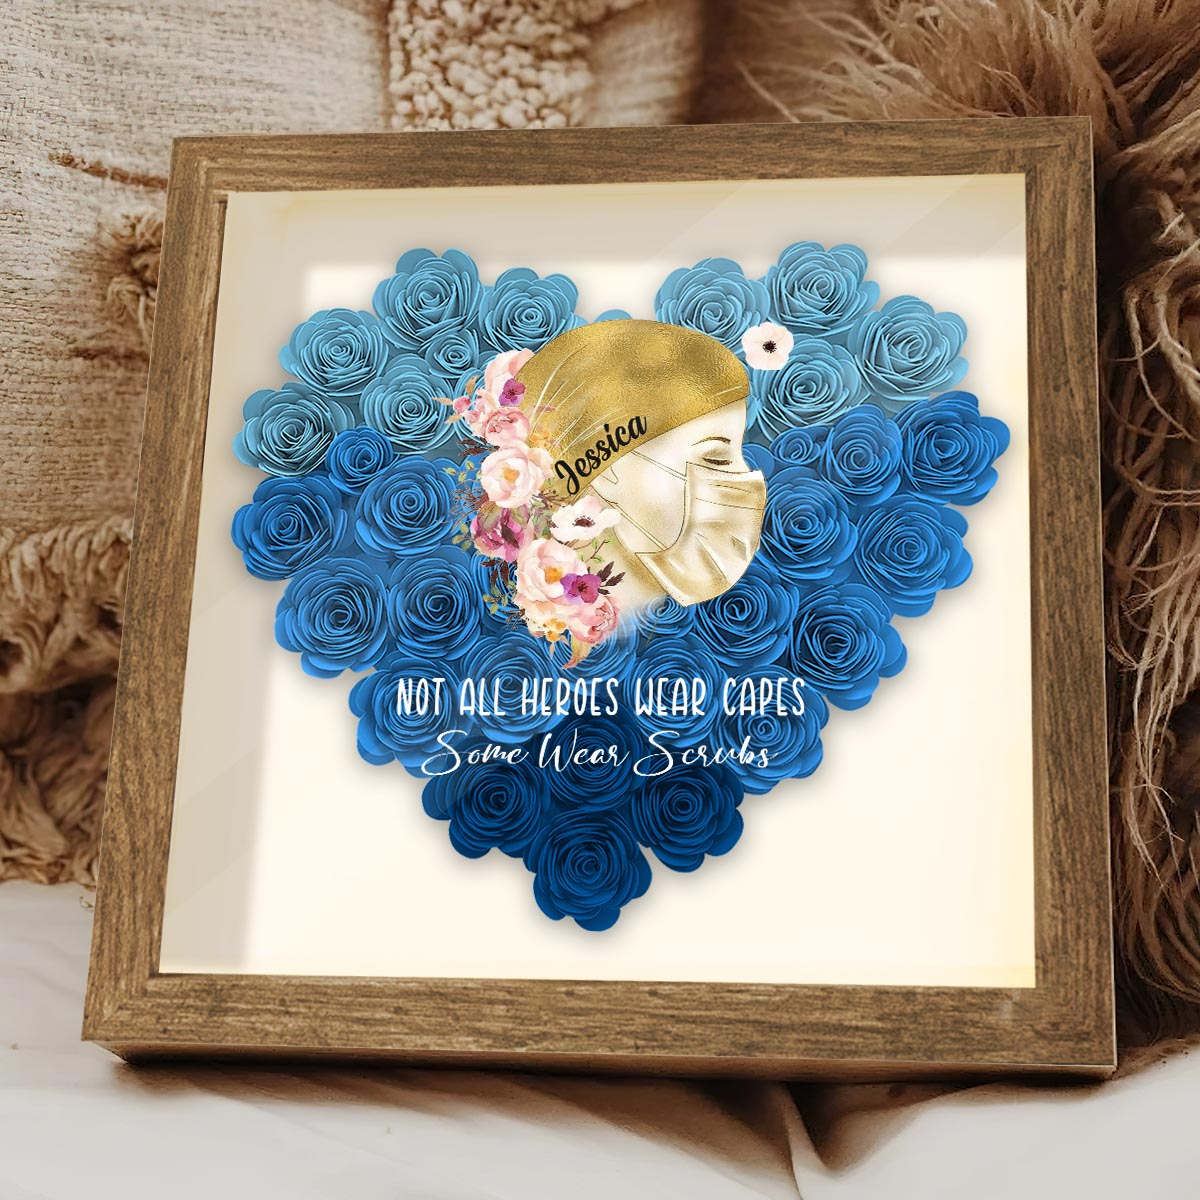 Discover Not All Heroes Wear Capes - Personalized Nurse Flower Frame Box